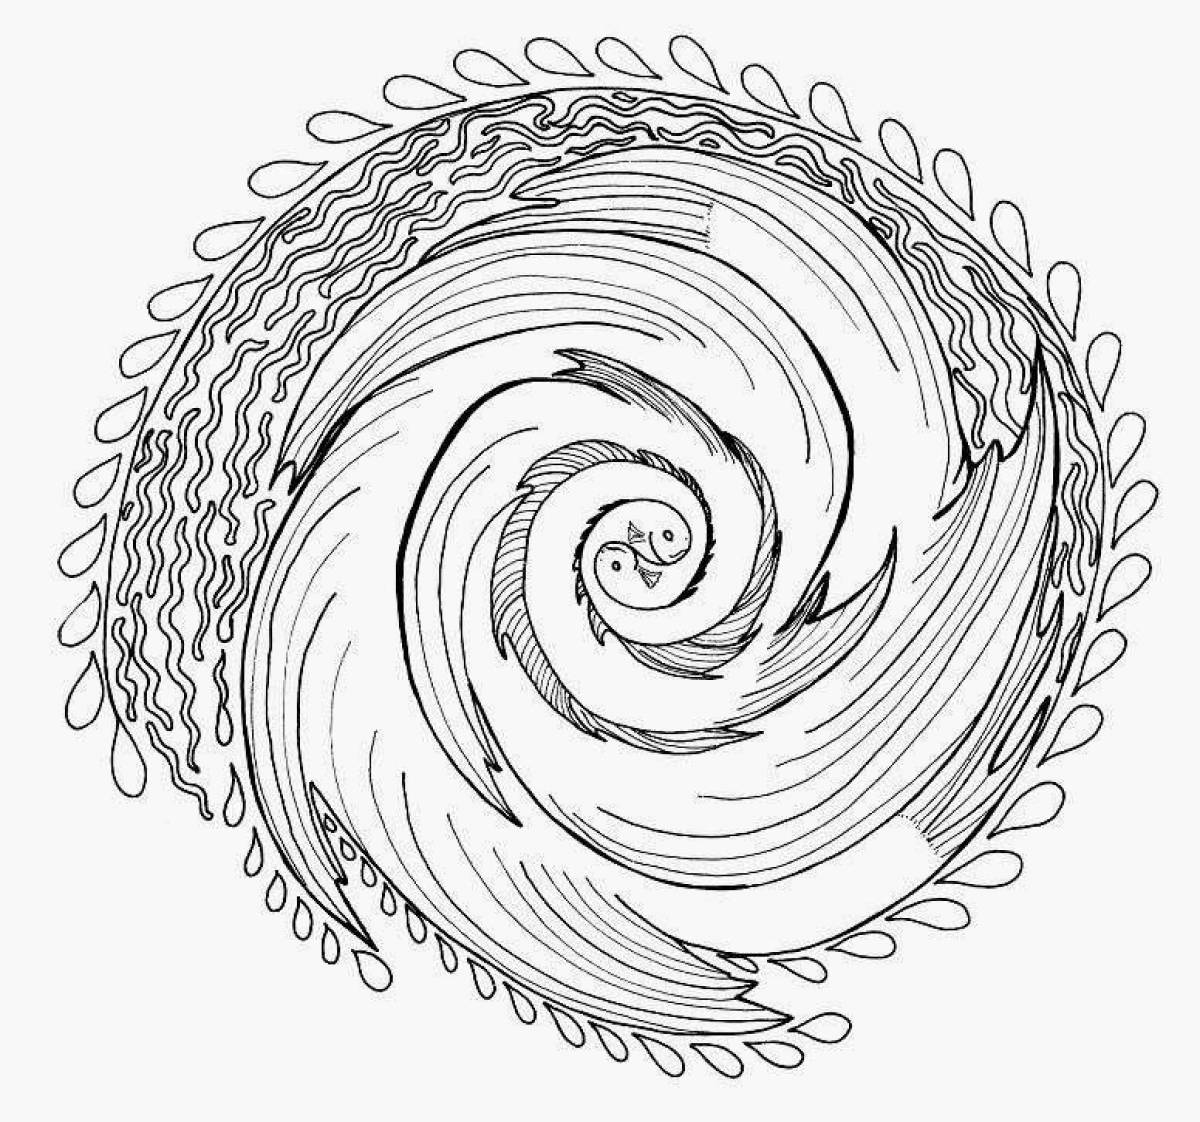 Violent coloring in a circle in a spiral